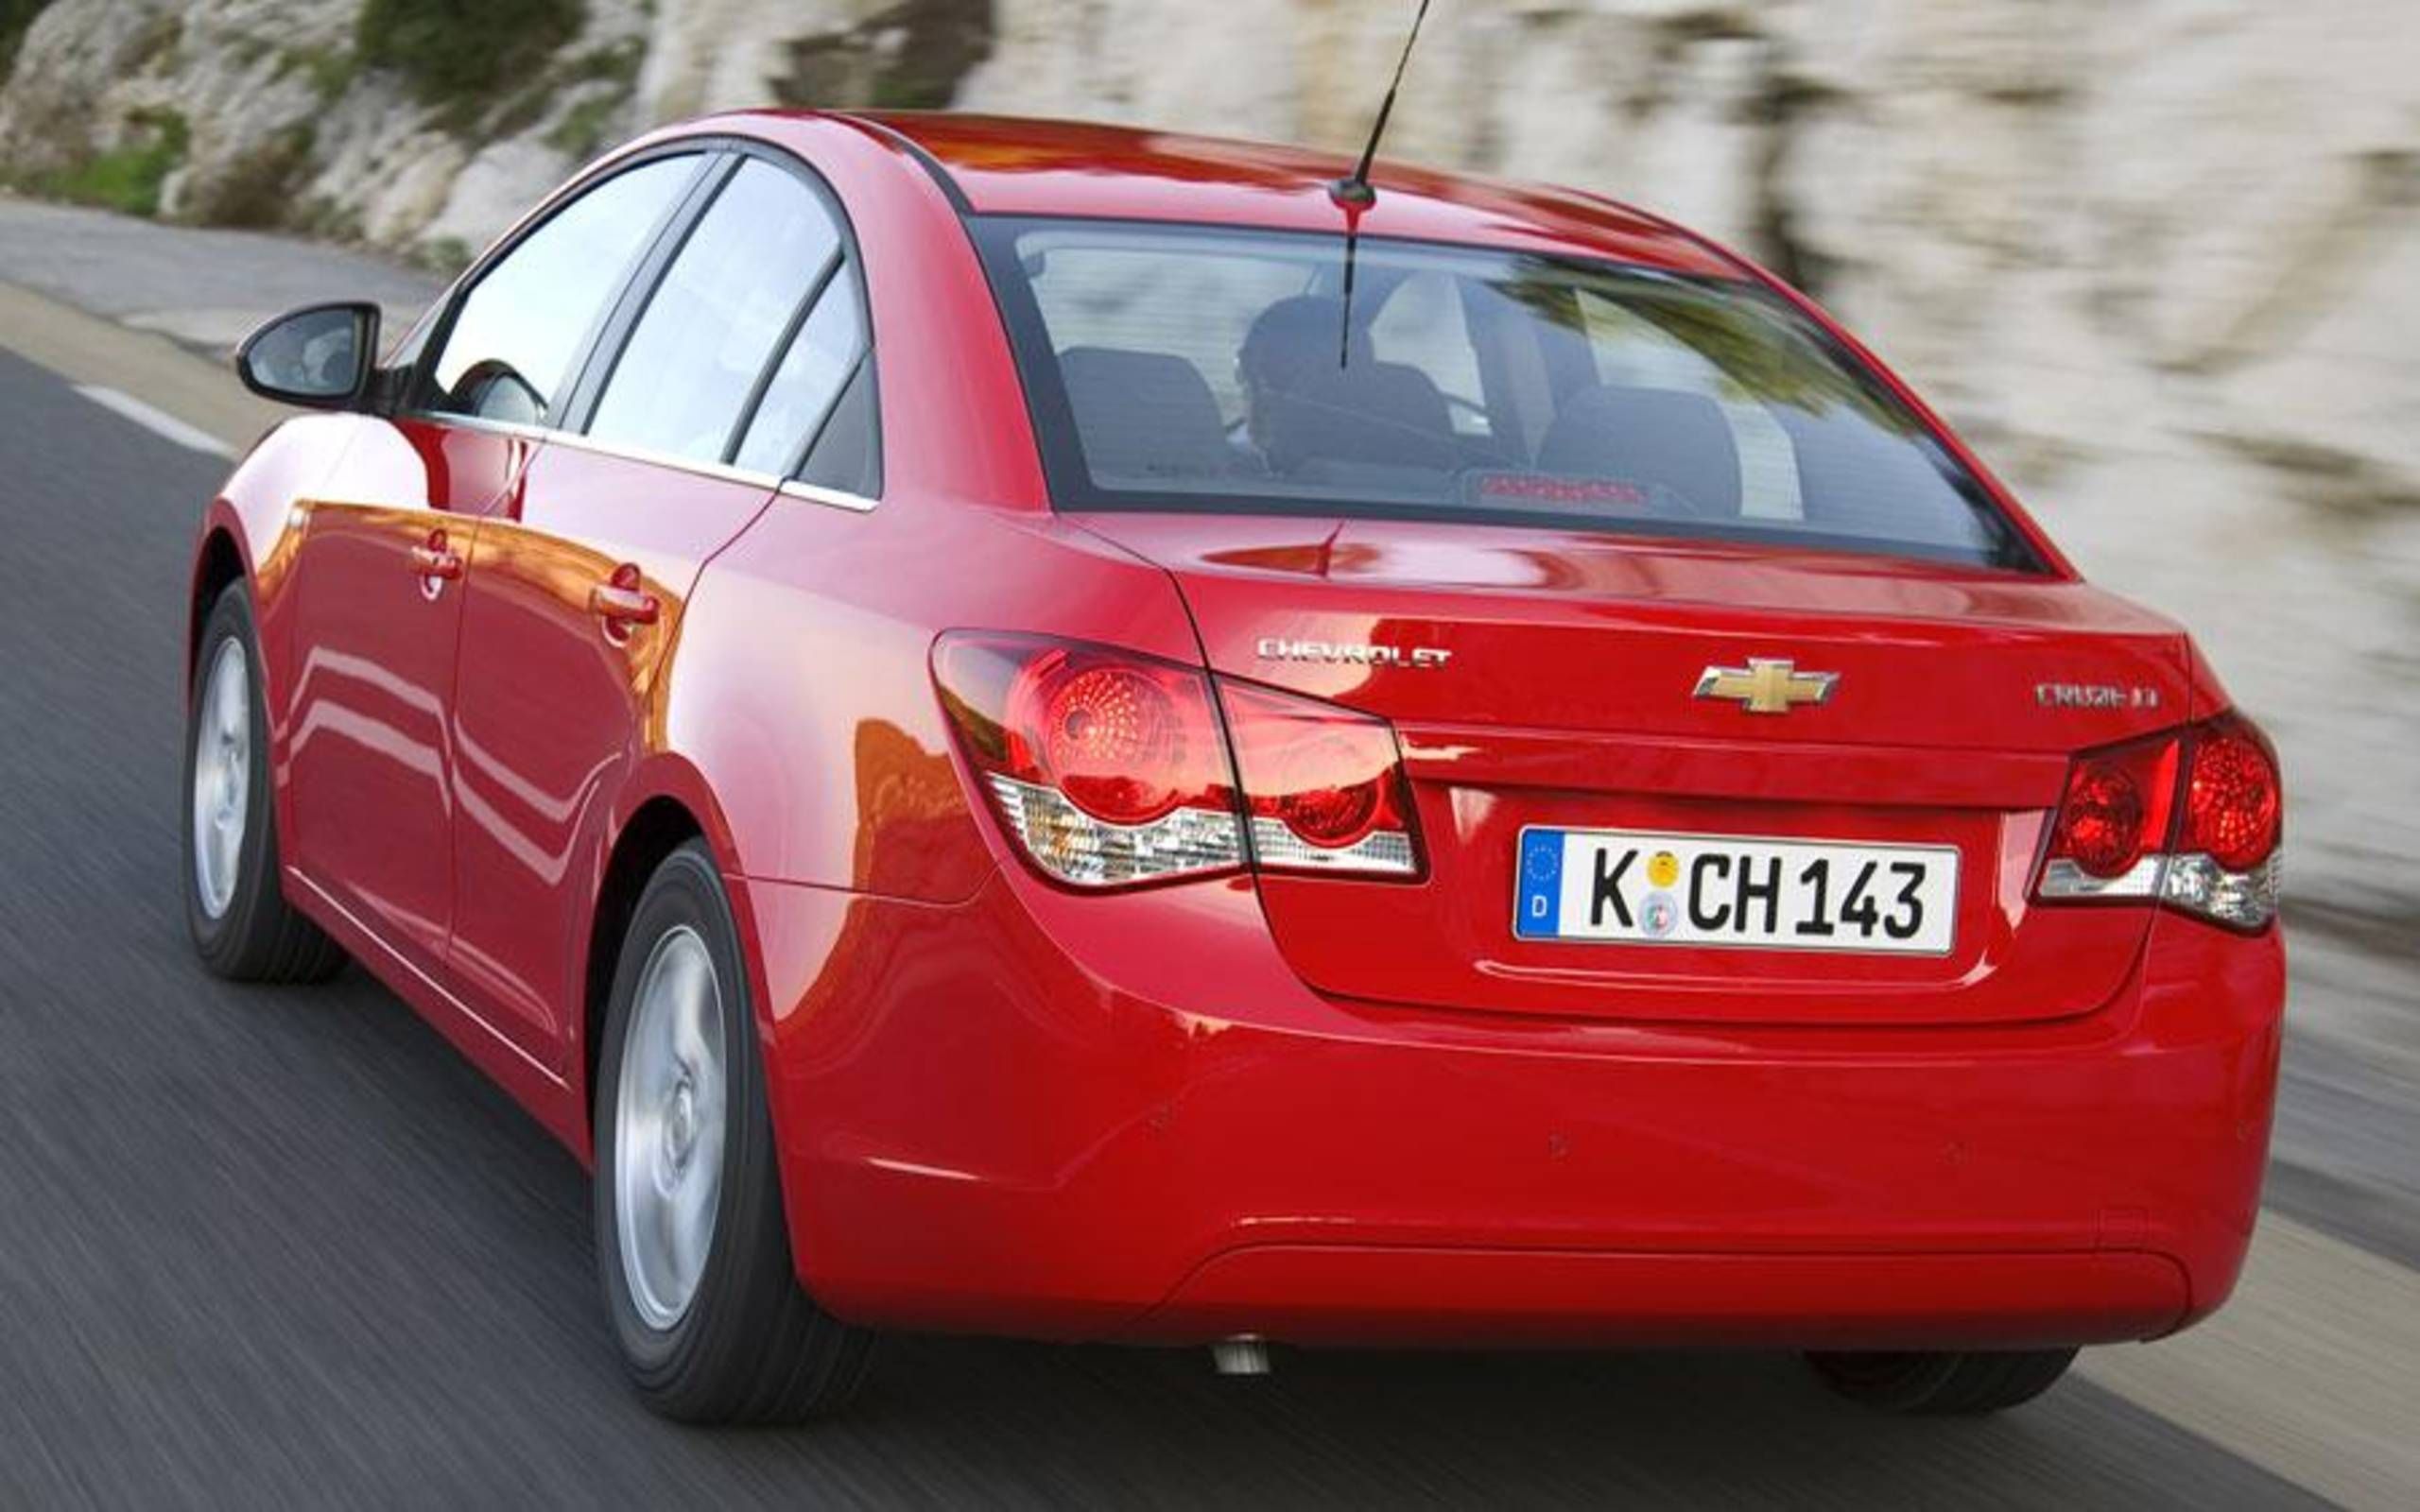 Chevy Cruze Could Dictate Direction of Compact-Car Segment in 2012